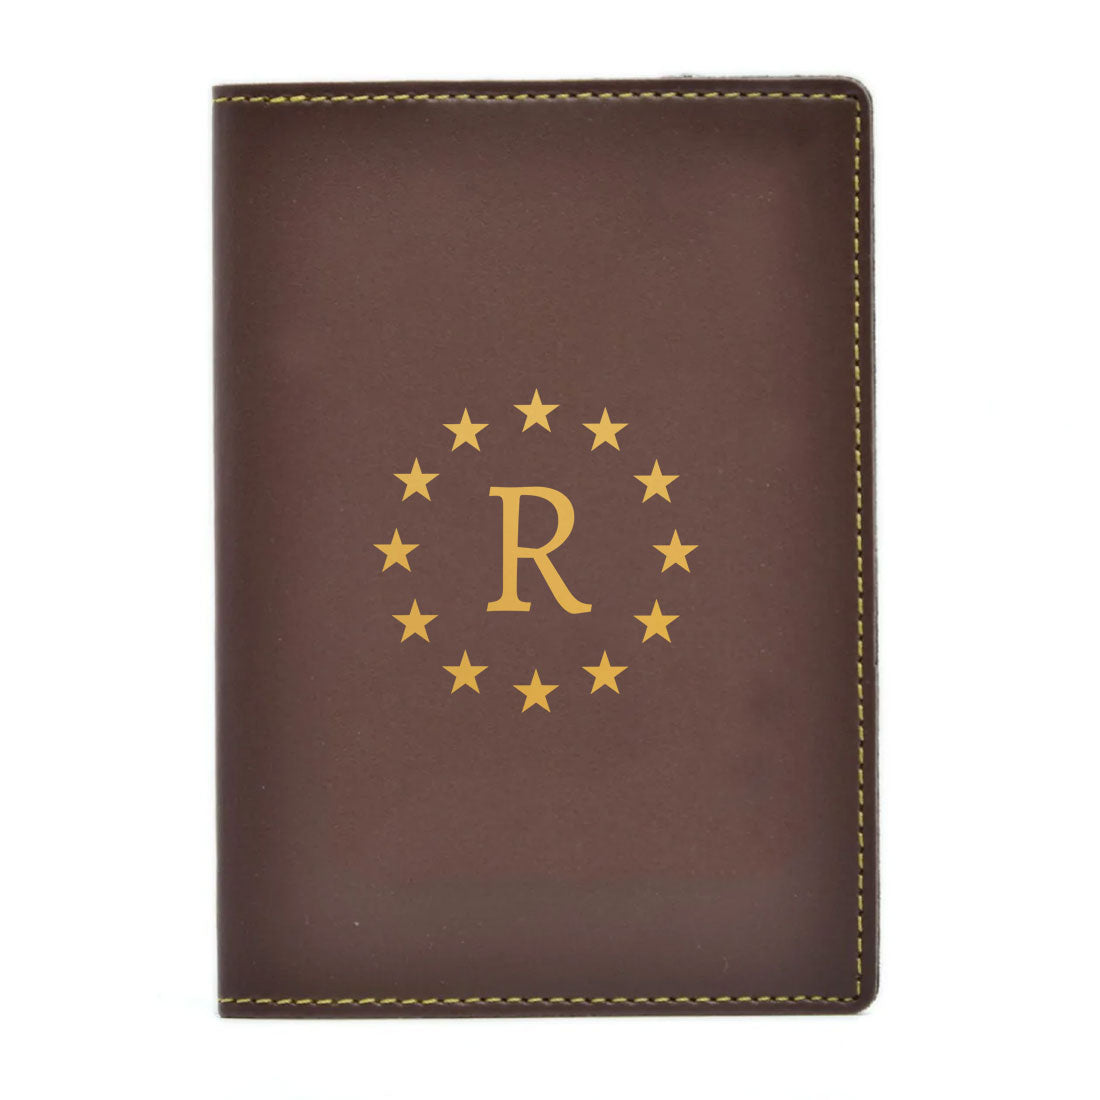 PU Leather Customized Travel Wallet Passport Holder for Men - Star